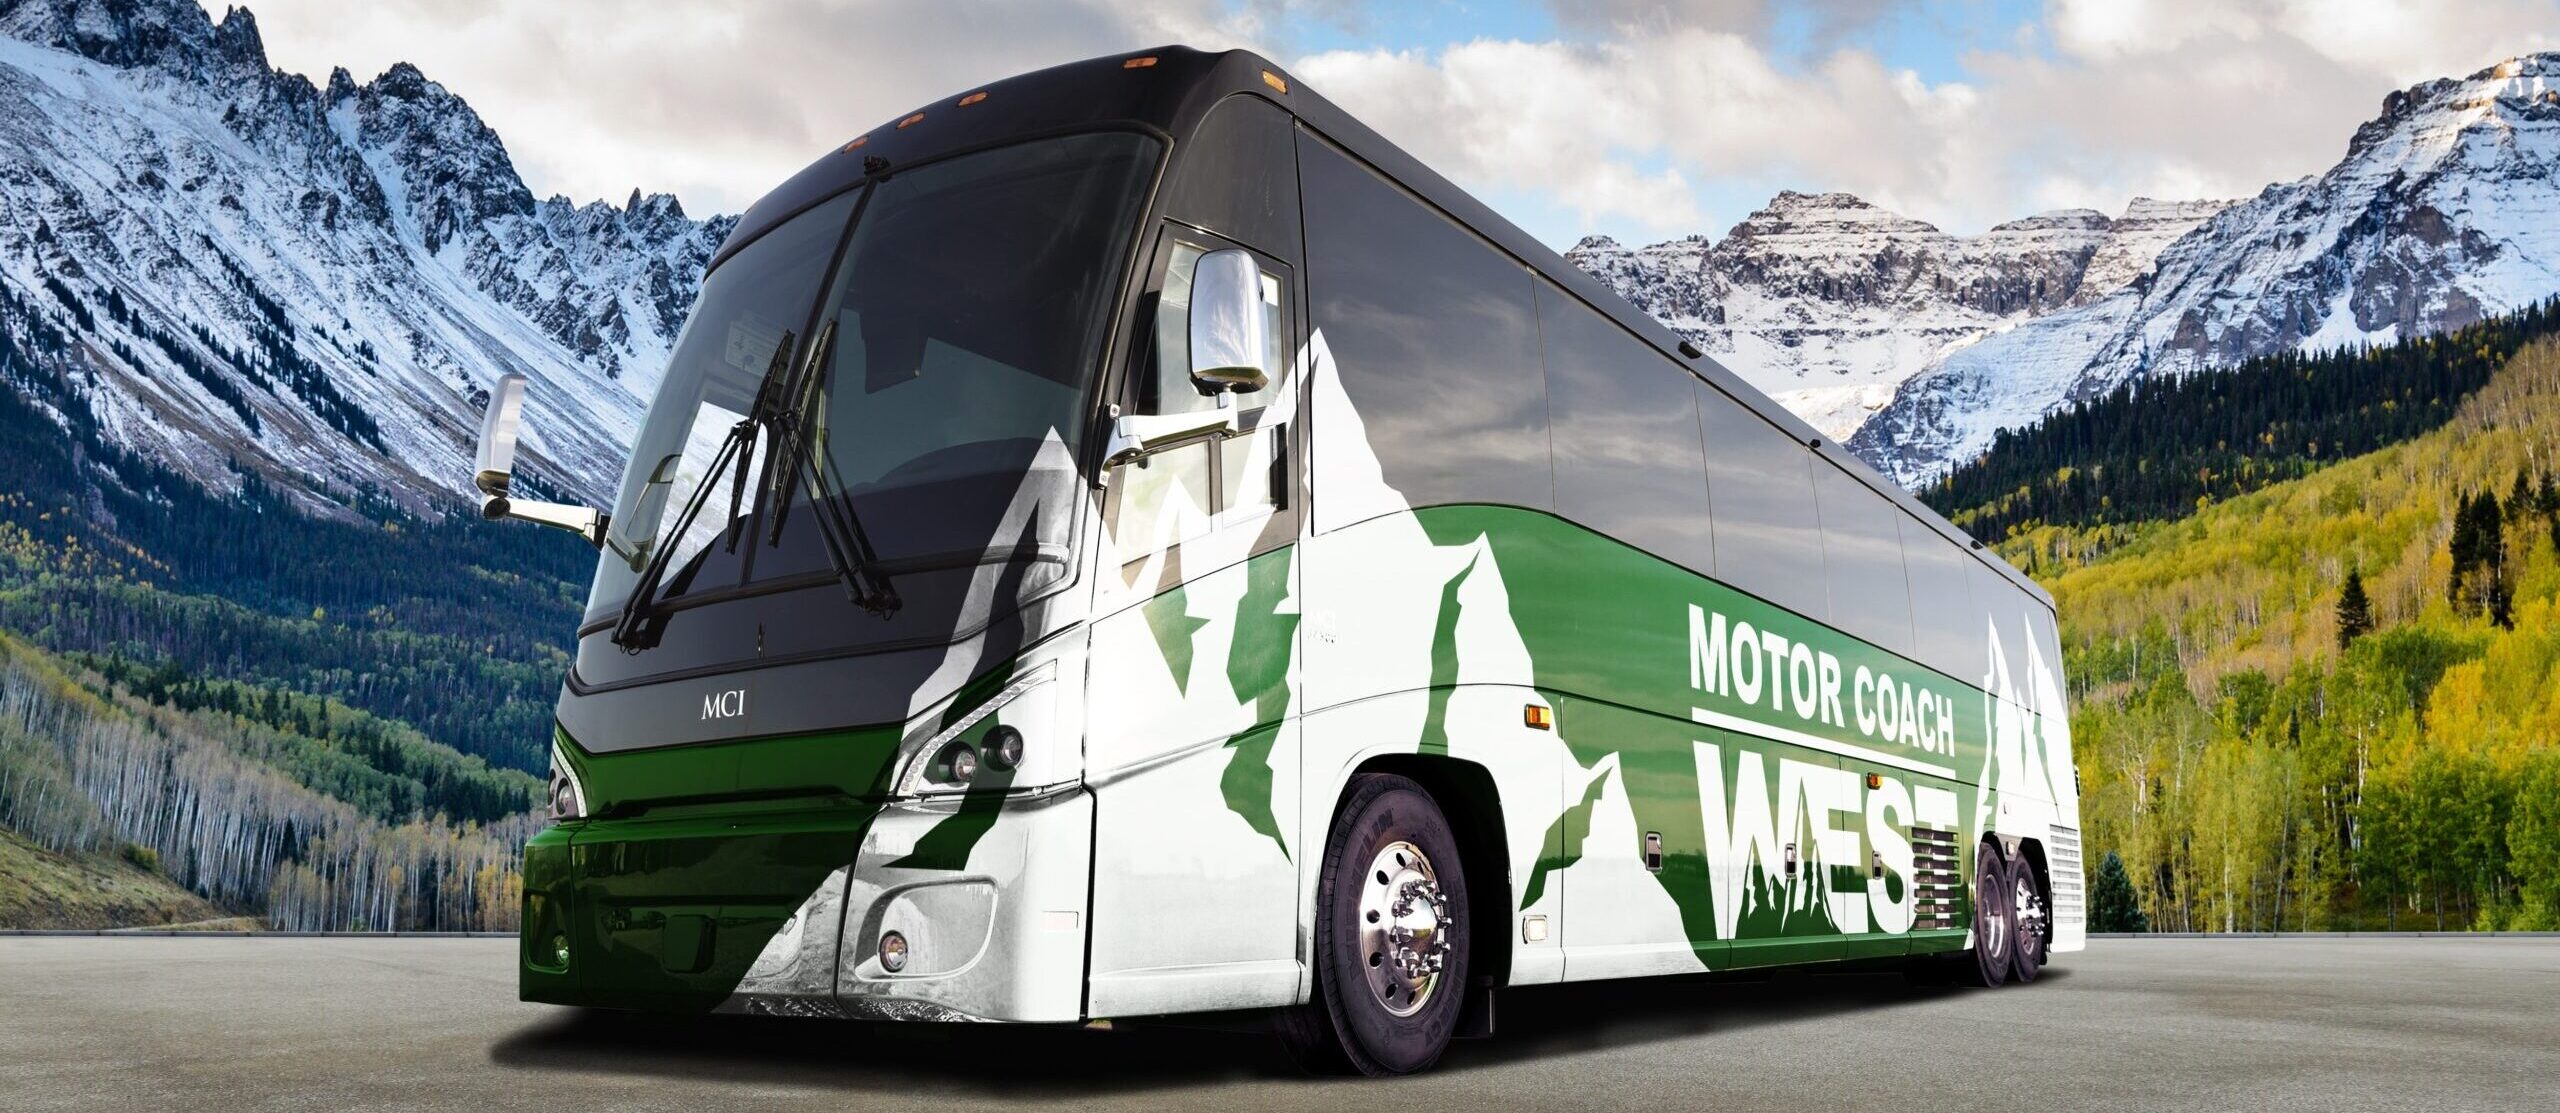 motor coach west mountains